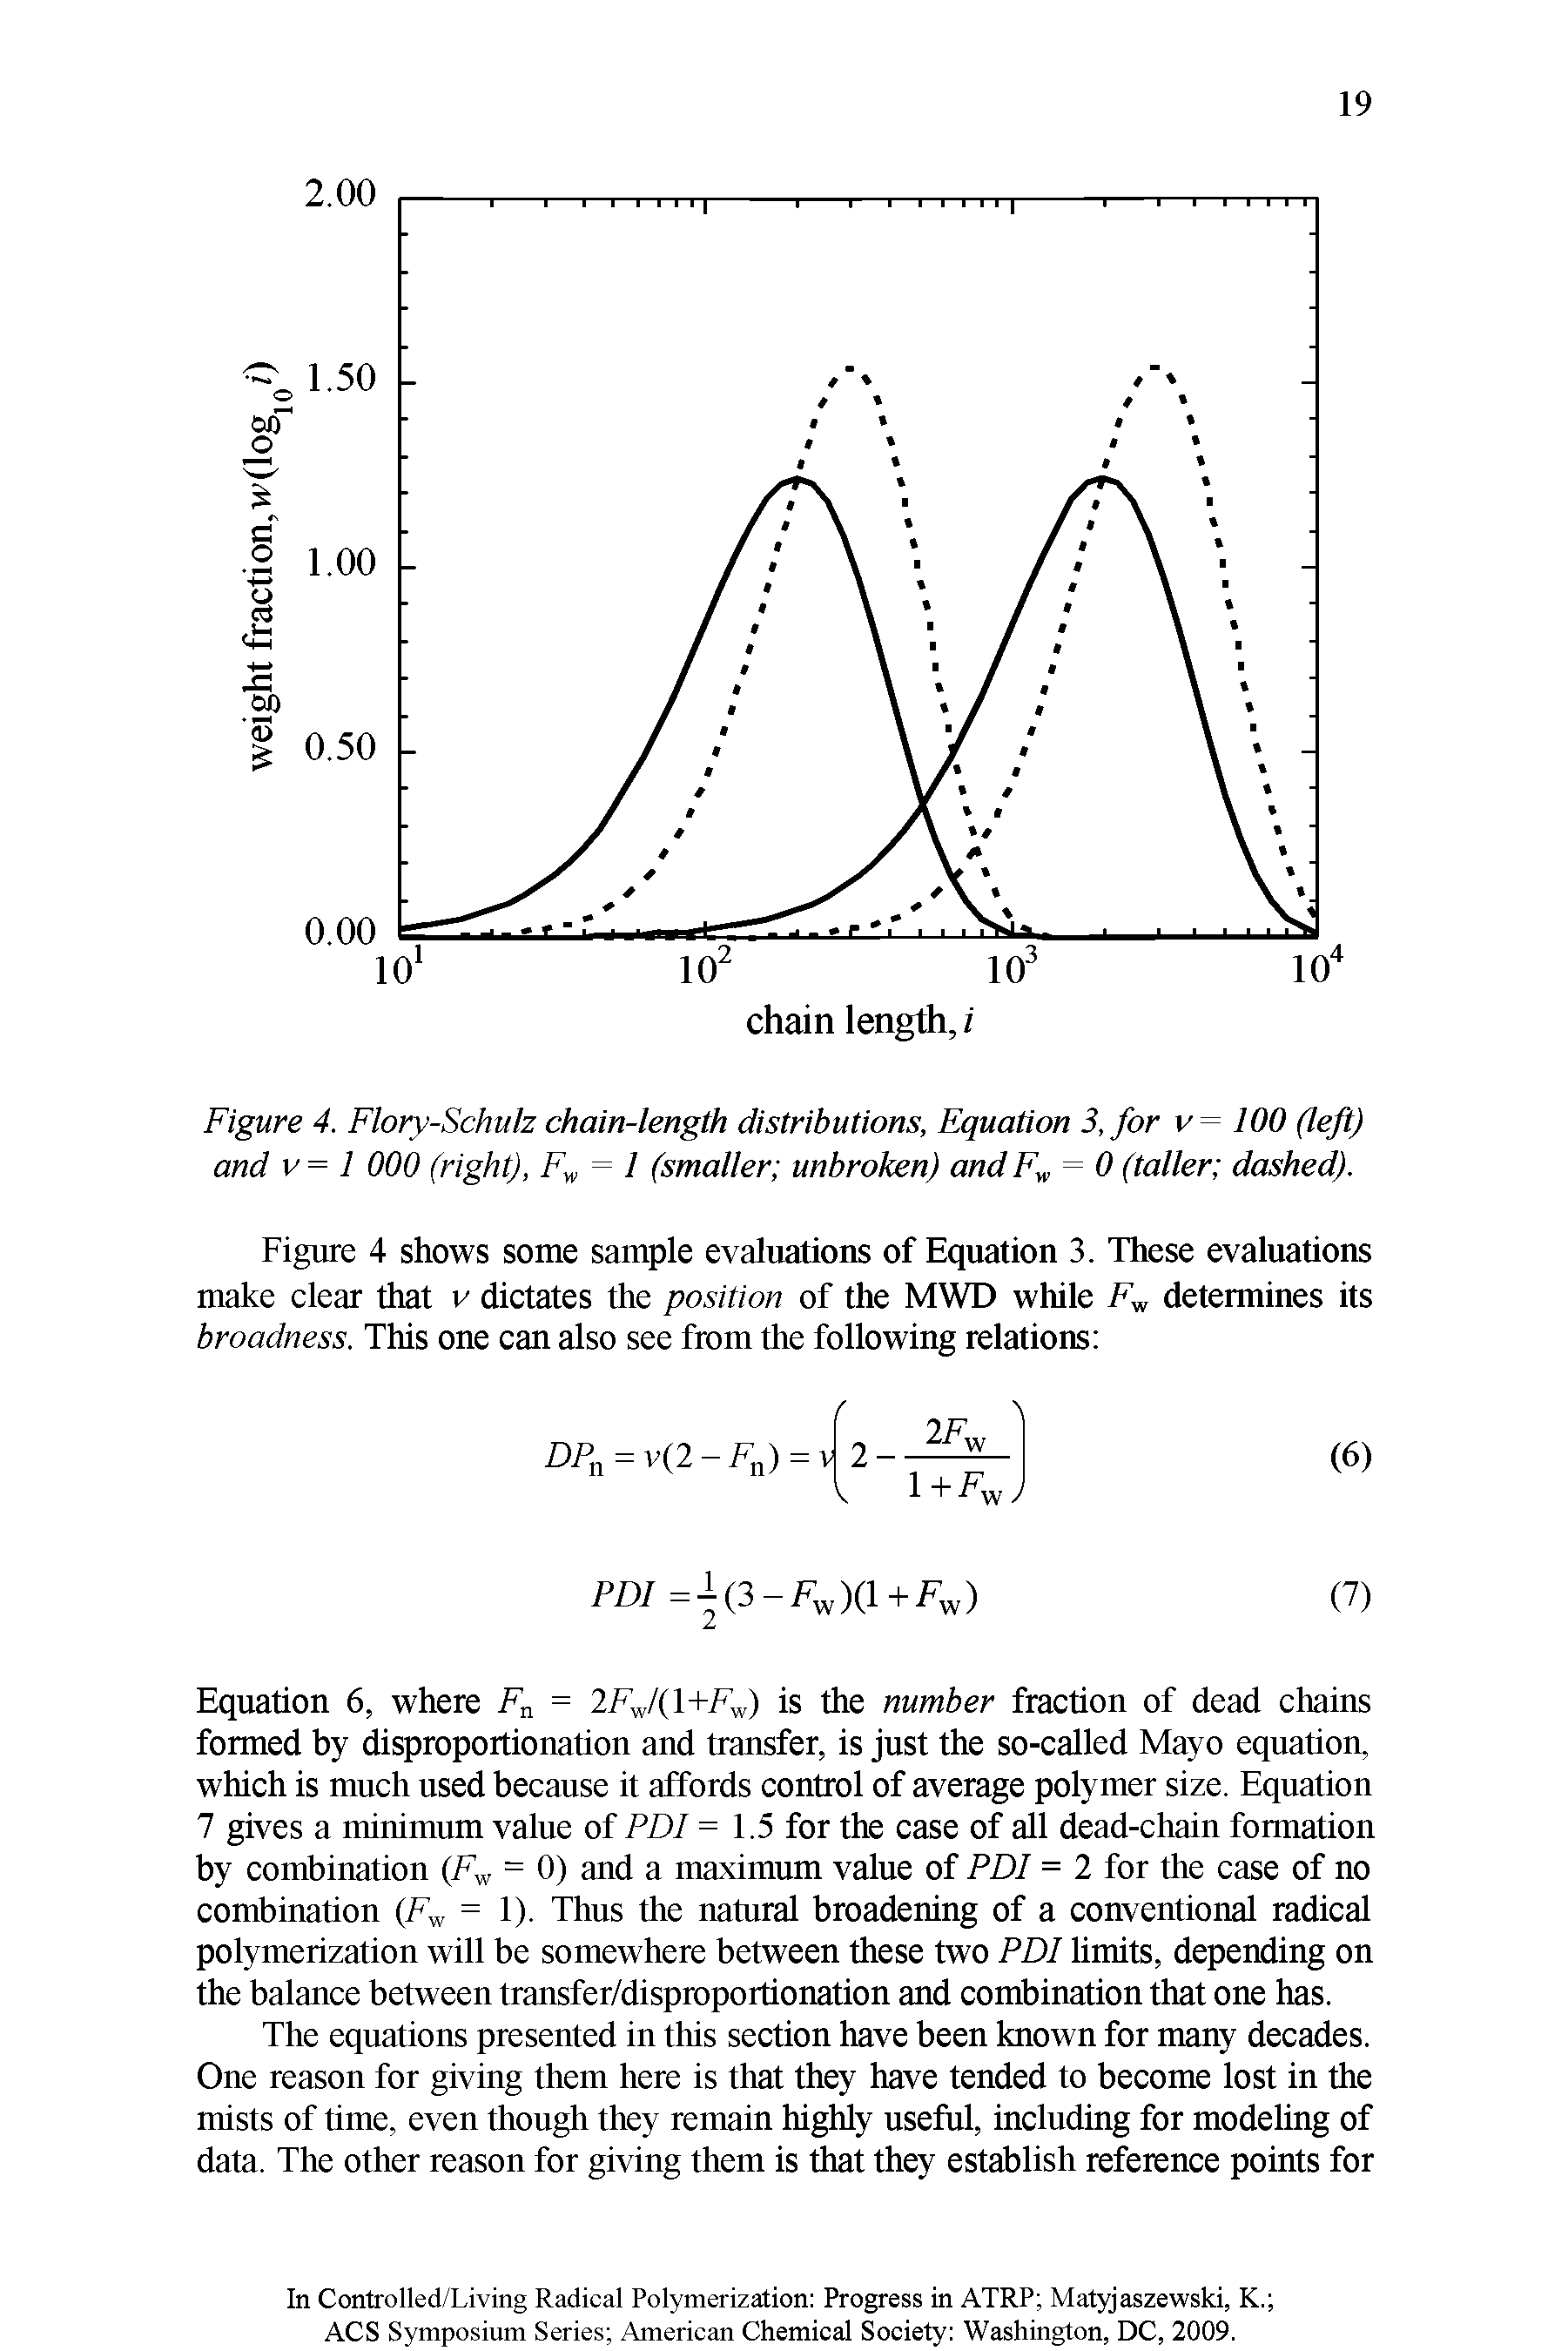 Figure 4. Flory-Schulz chain-length distributions. Equation 3, for v= 100 (left) and v = 1 000 (right), Fy, = 1 (smaller unbroken) andFy, = 0 (taller dashed).